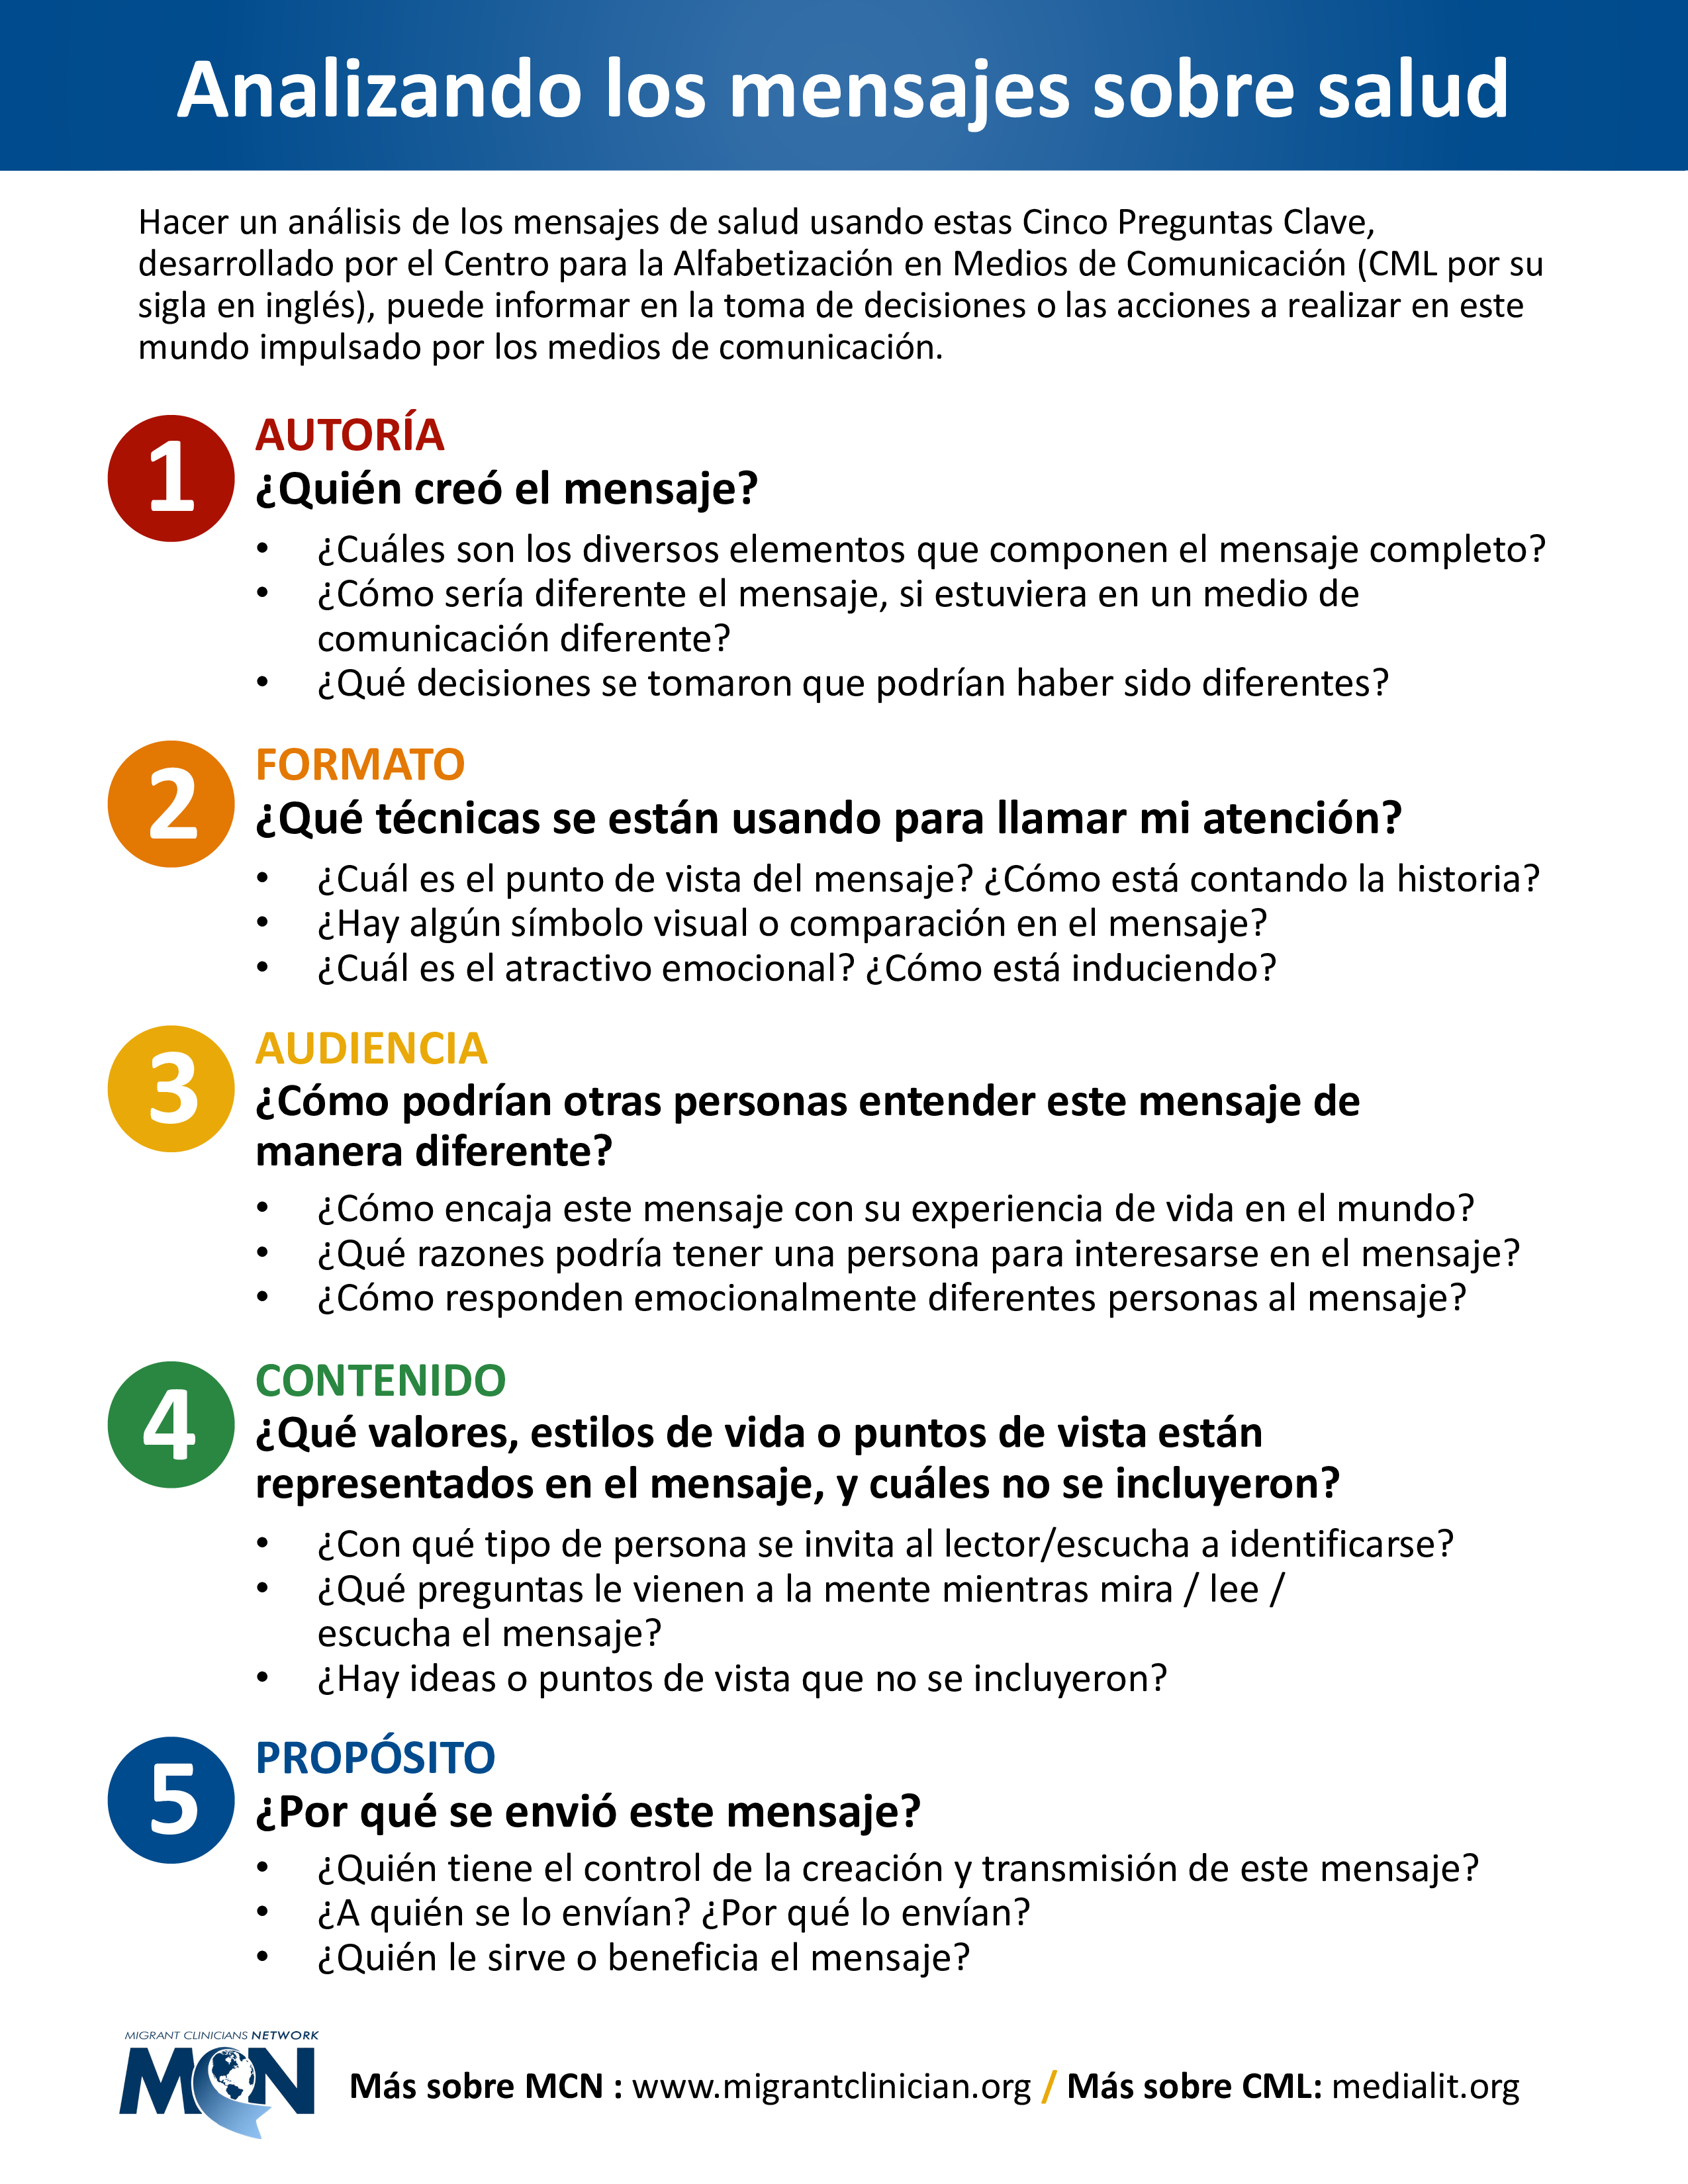 A snapshot of the factsheet with the list of five questions to ask to improve media literacy